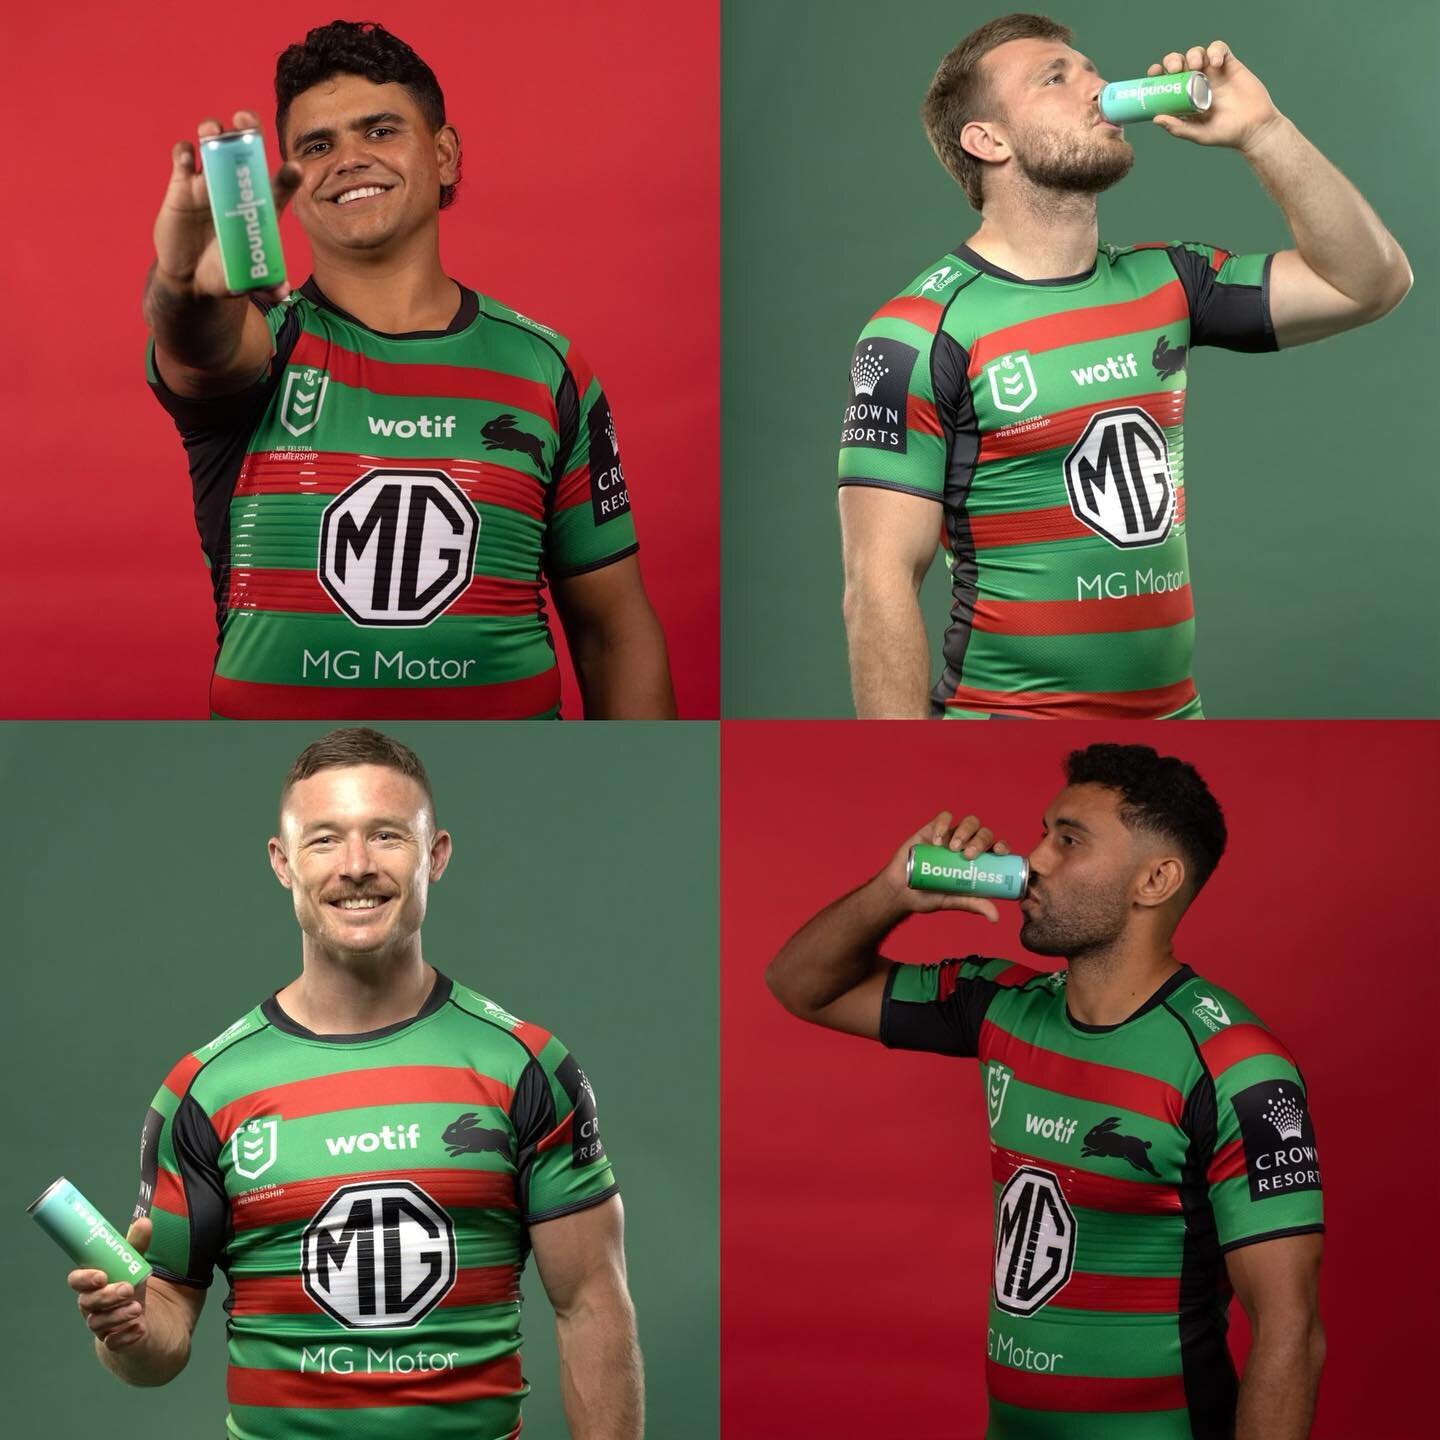 🚨 SPECIAL GIVEAWAY 🚨

Boundless has partnered with the South Sydney Rabbitohs to allow 1 Boundless supporter to exclusively attend the next Rabbitohs game. 

You will have the opportunity to sit with VIPs ONLY in the Chairmans Lounge! 
HOW TO ENTER